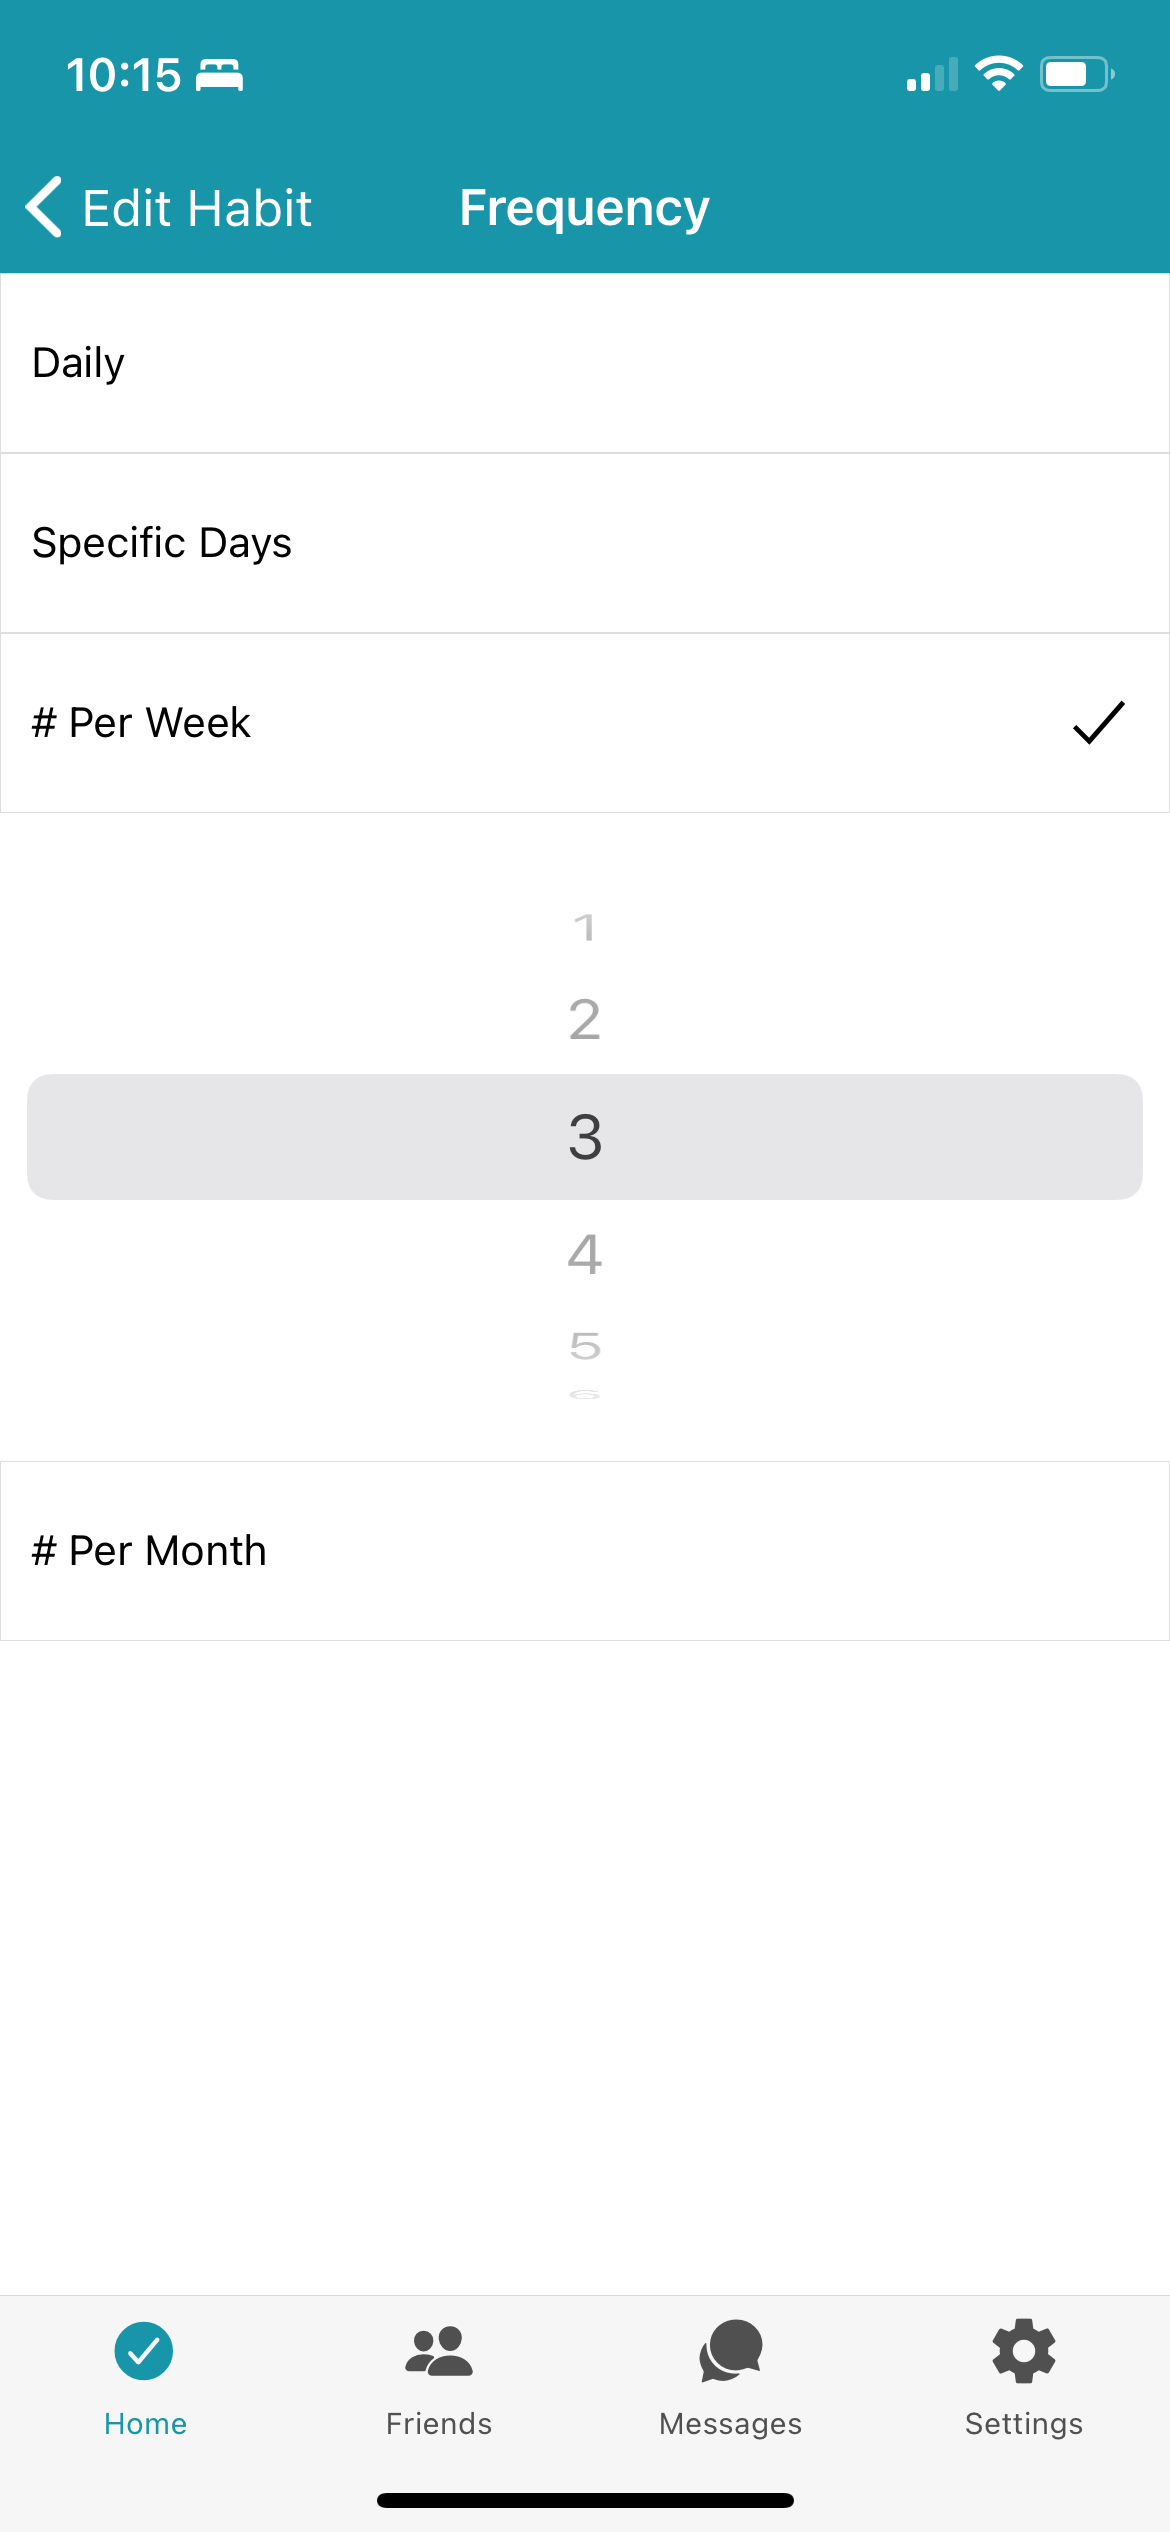 Setting Frequency to Number of Days per week, on HabitShare